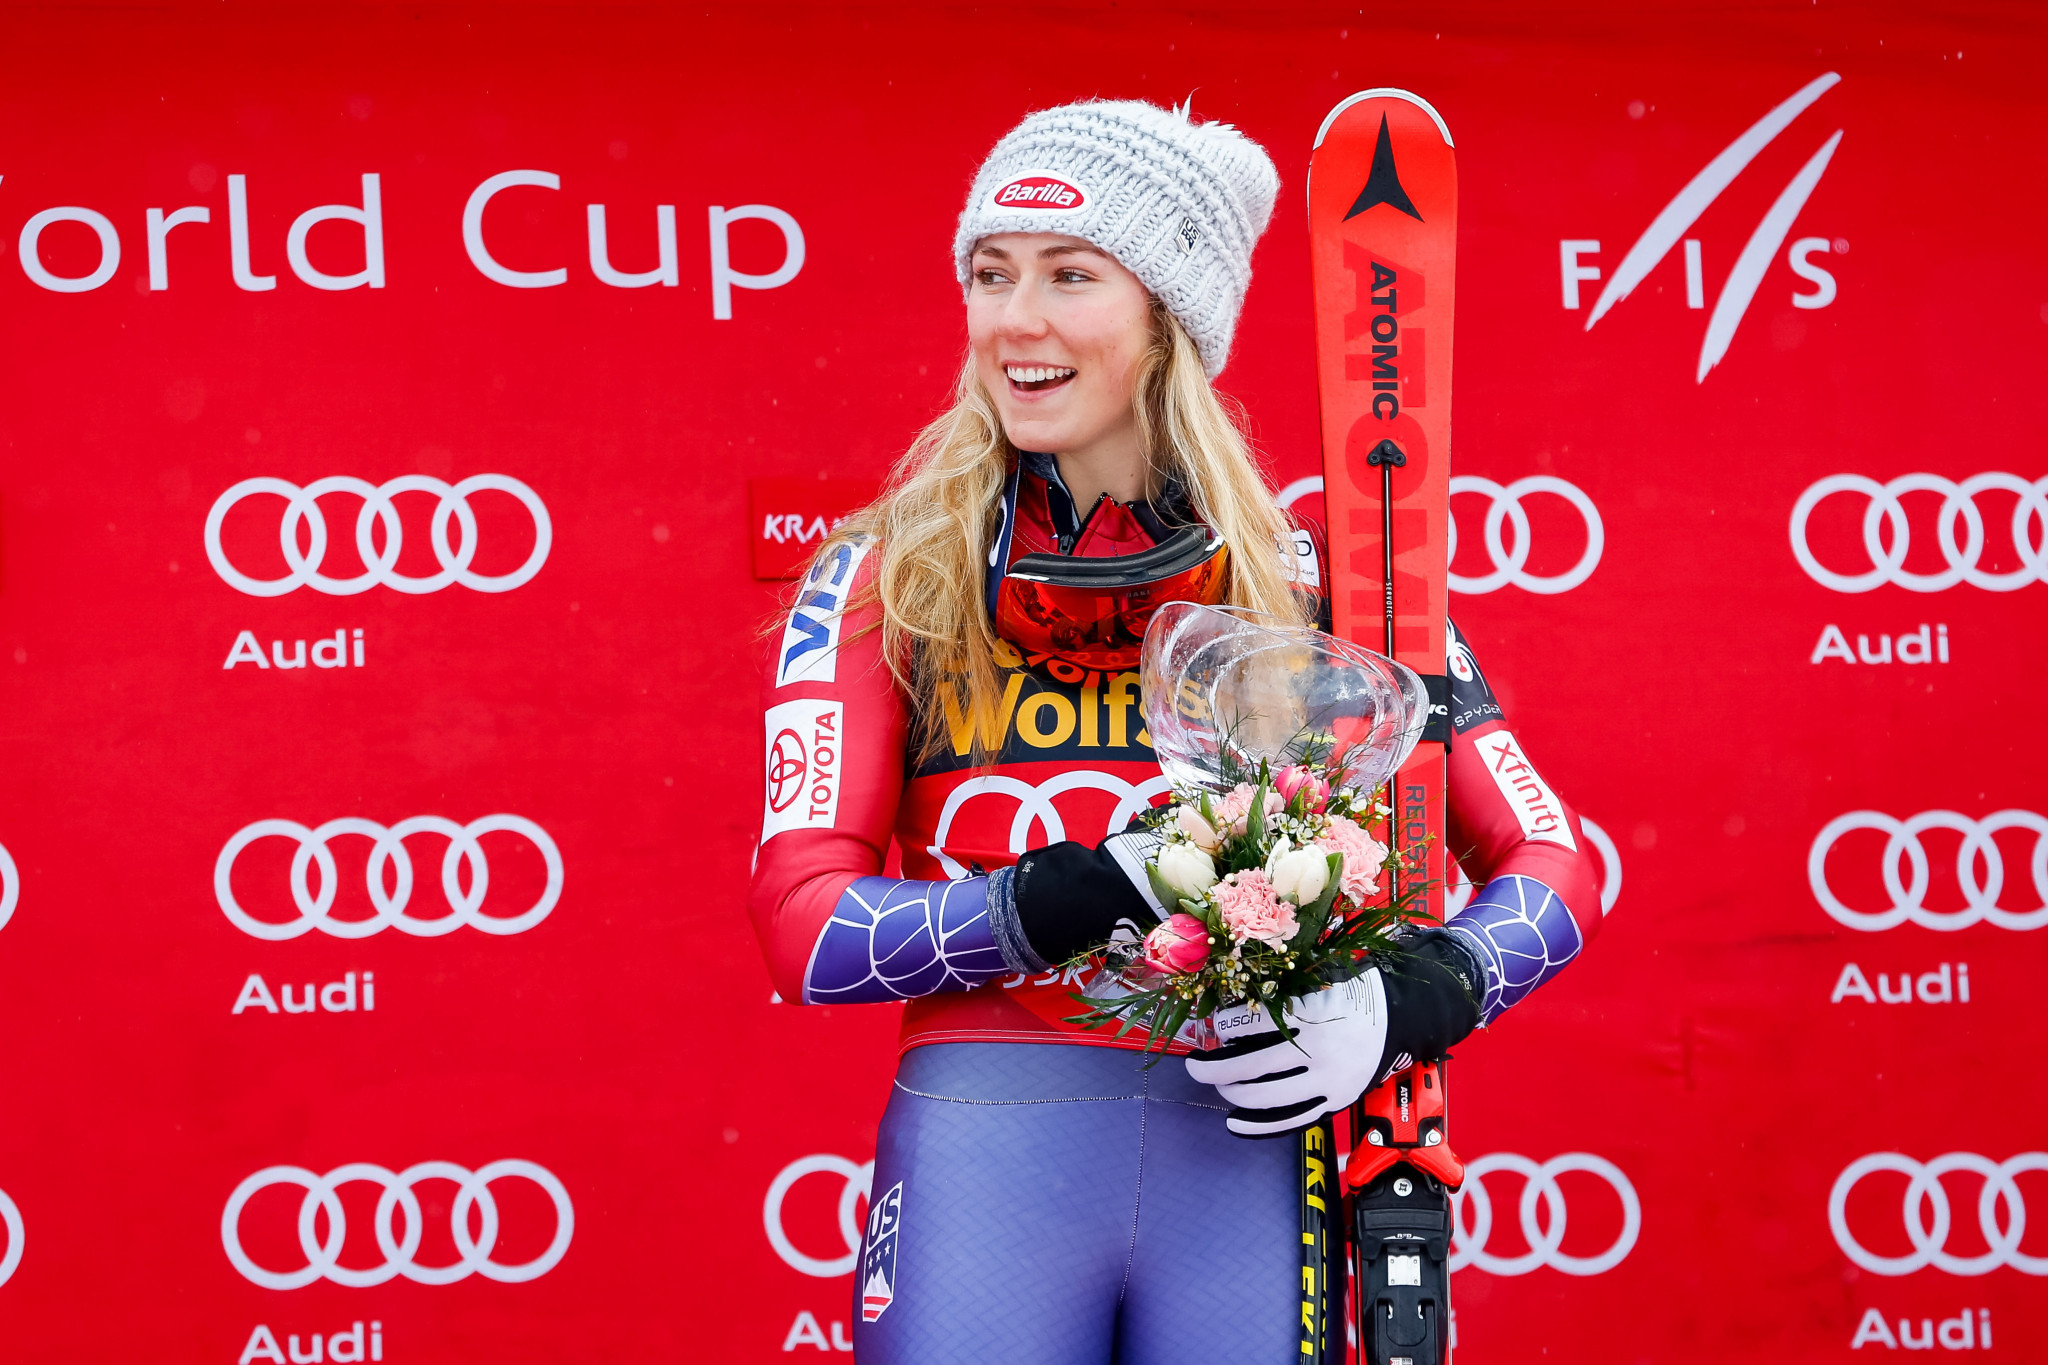 Shiffrin looks increasingly likely to defender her FIS Alpine Ski World Cup title after victory in Slovenia ©Getty Images